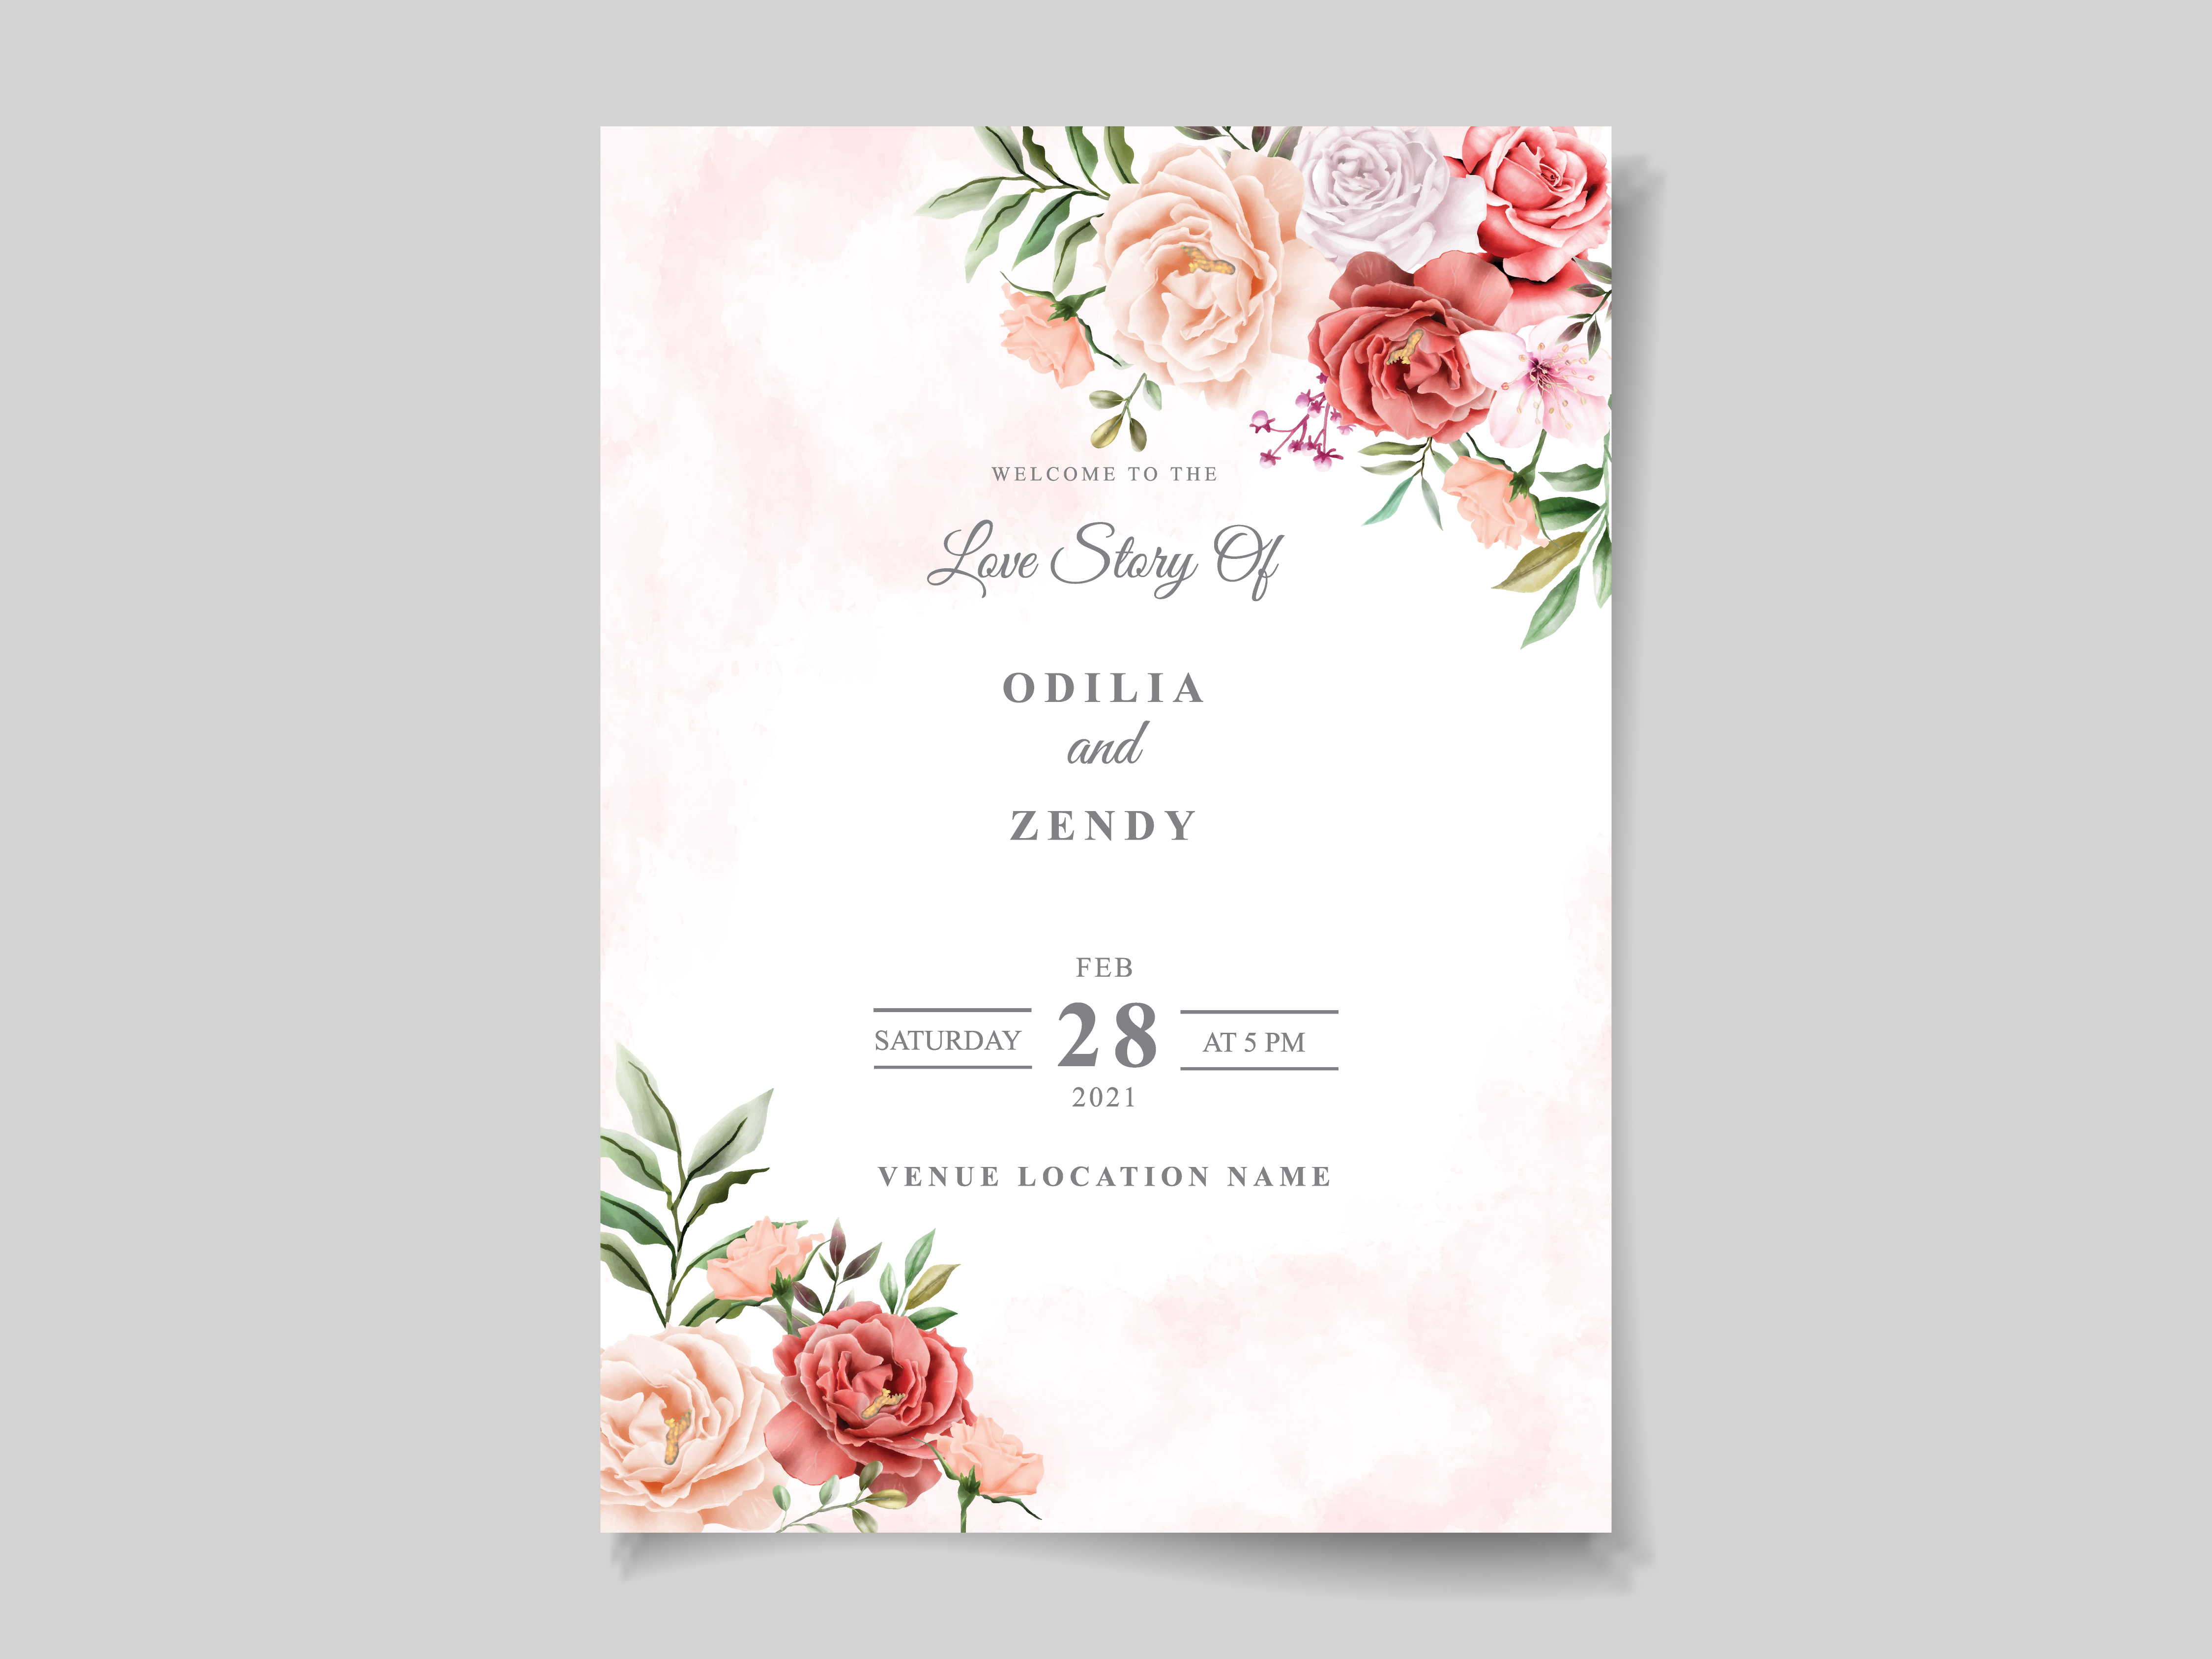 floral wedding invitation vector art, icons, and graphics for free